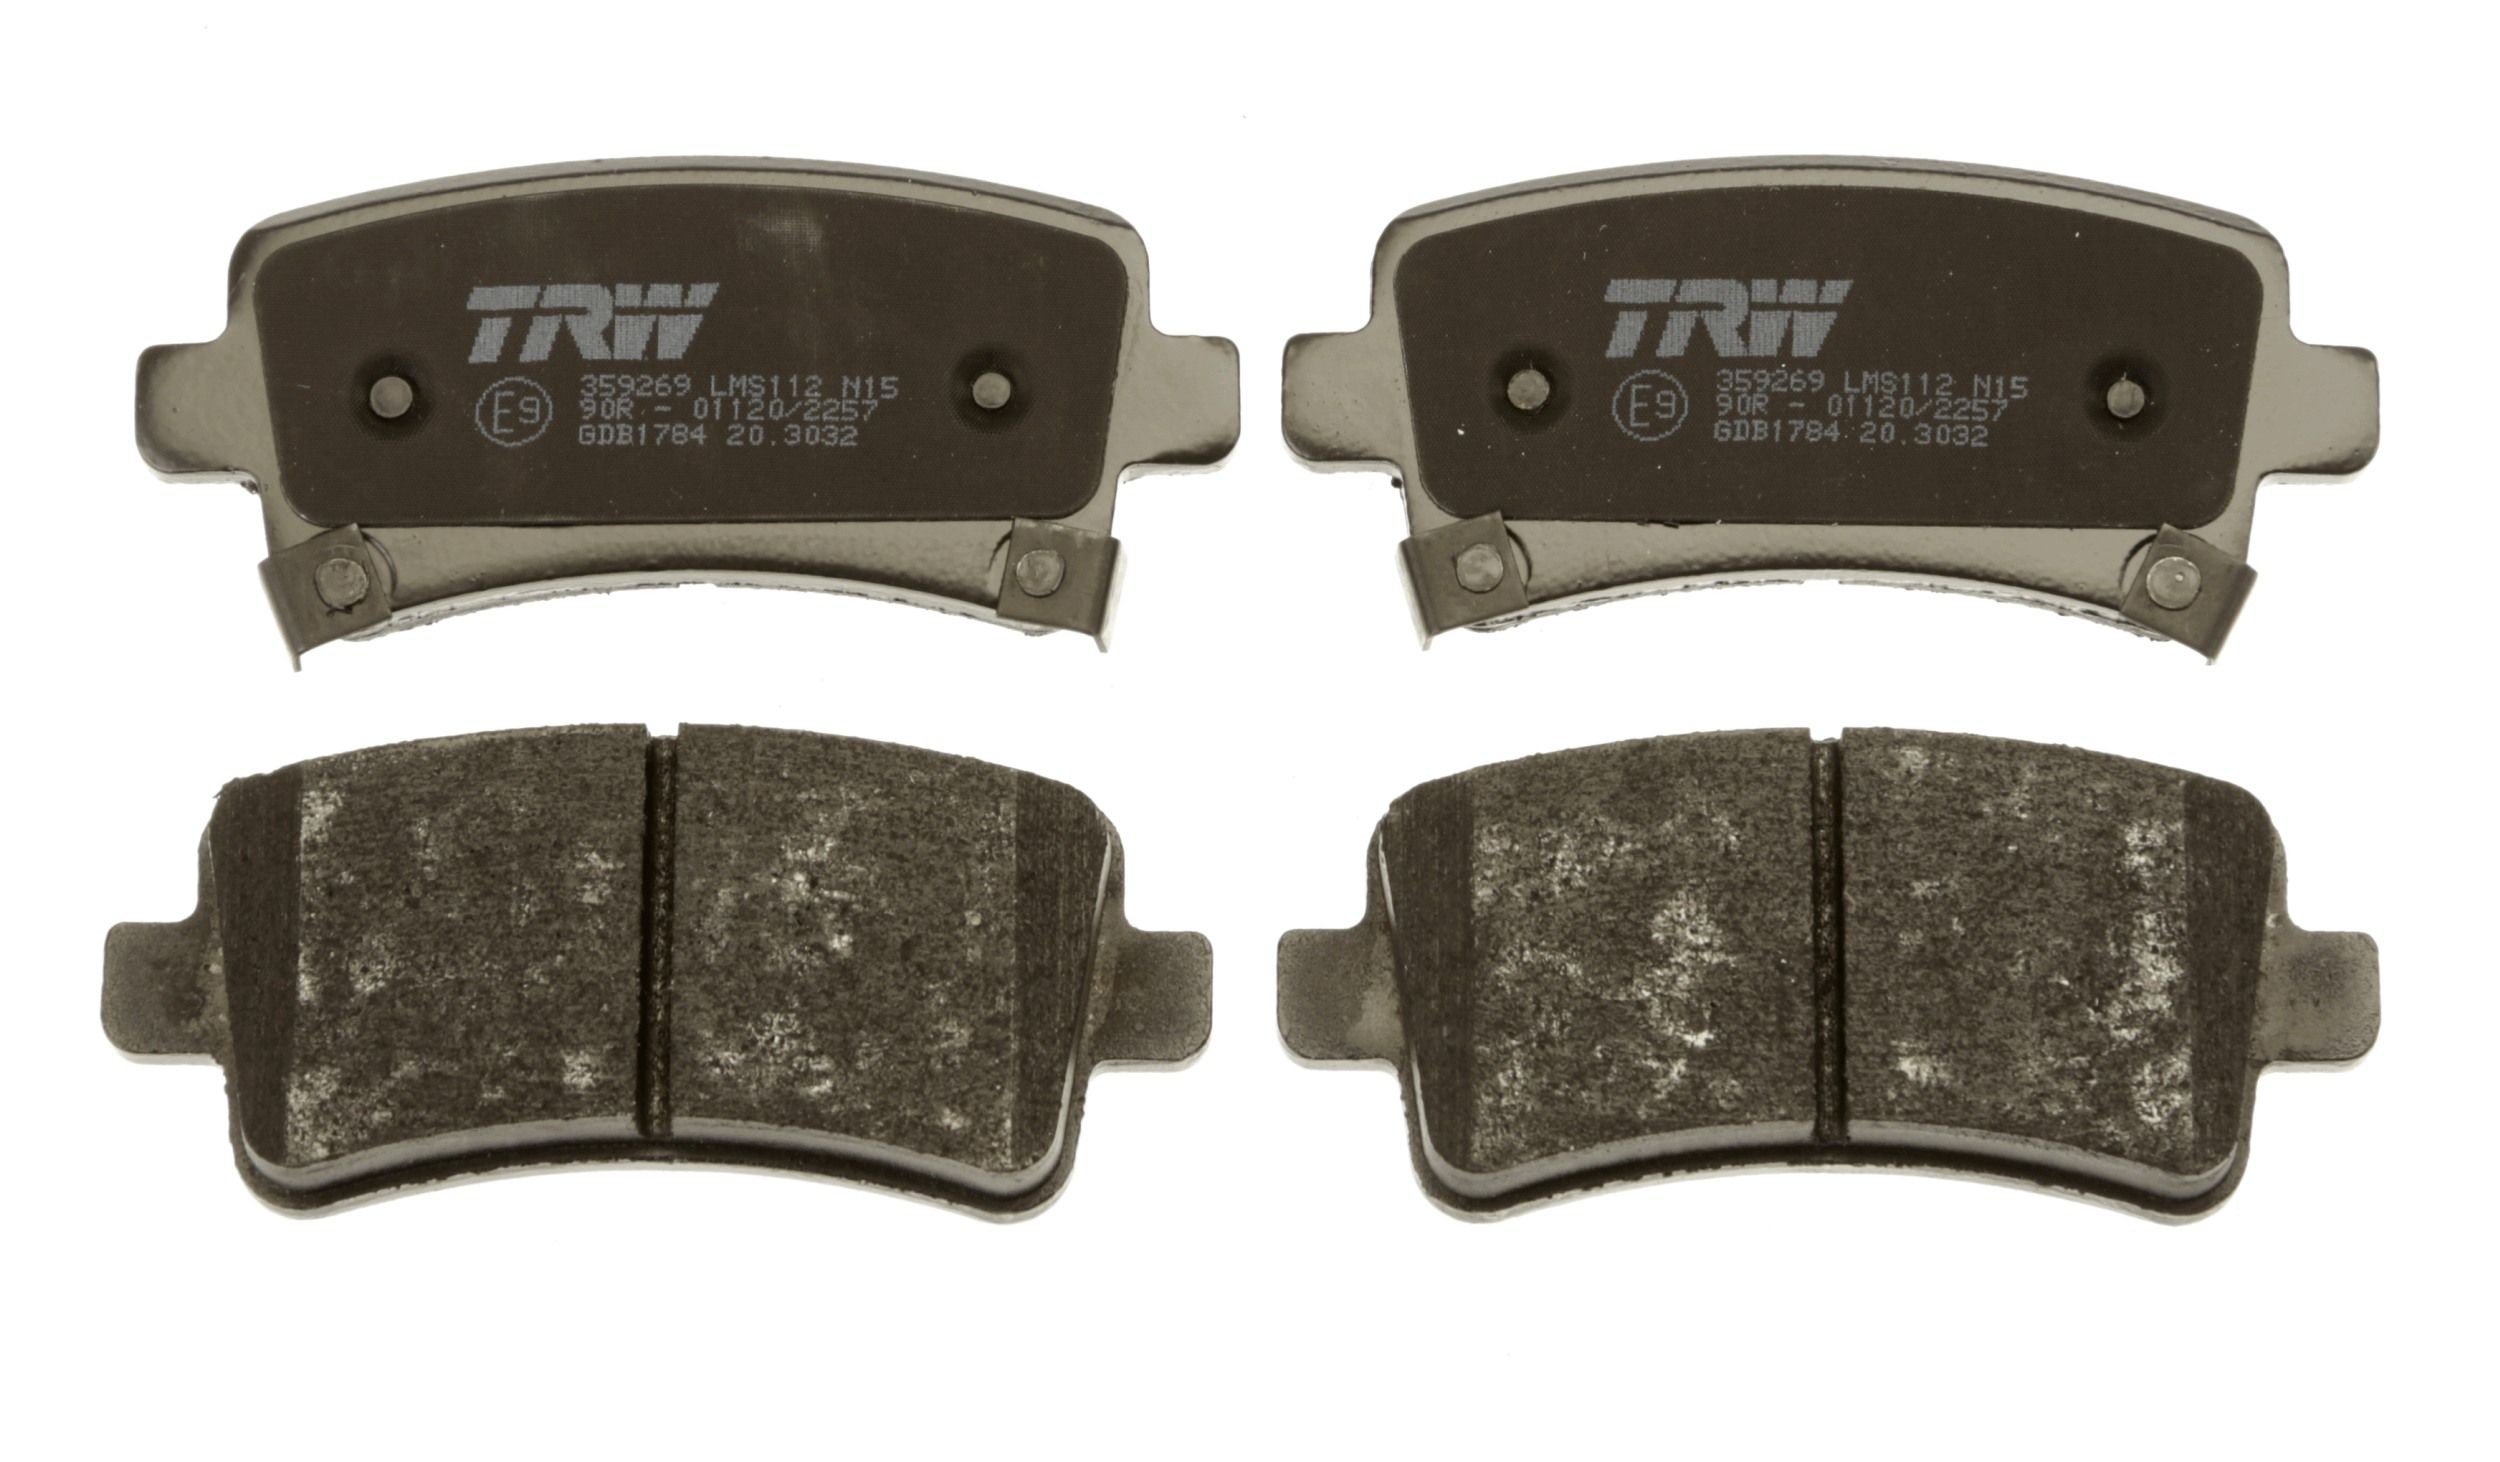 GDB1784 Set of brake pads GDB1784 TRW with acoustic wear warning